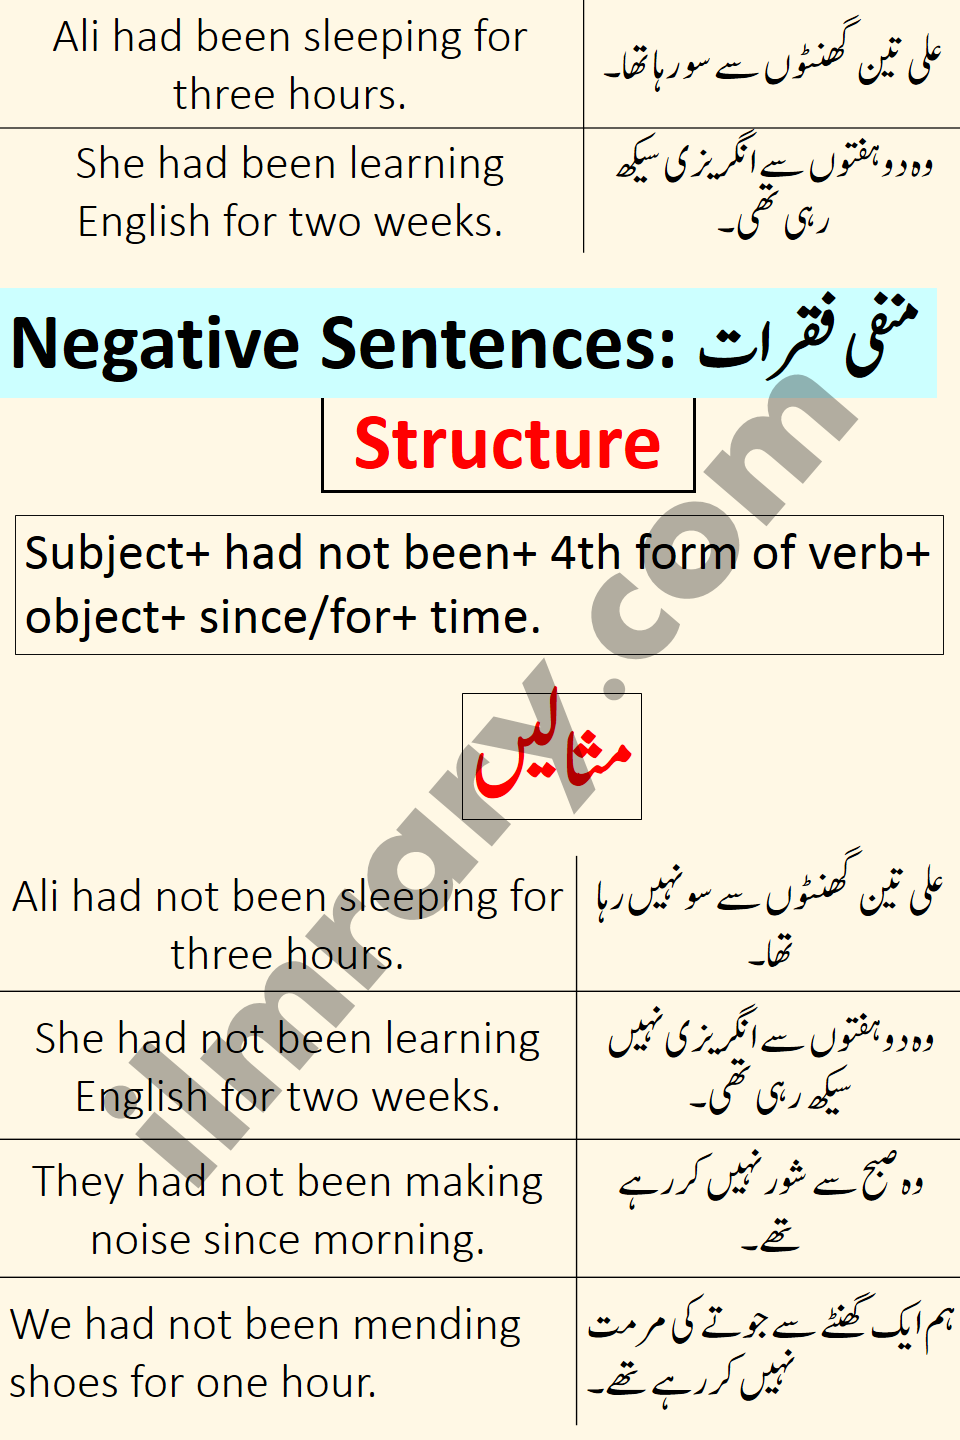 Negative Examples for Past Perfect Continuous Tense in Urdu